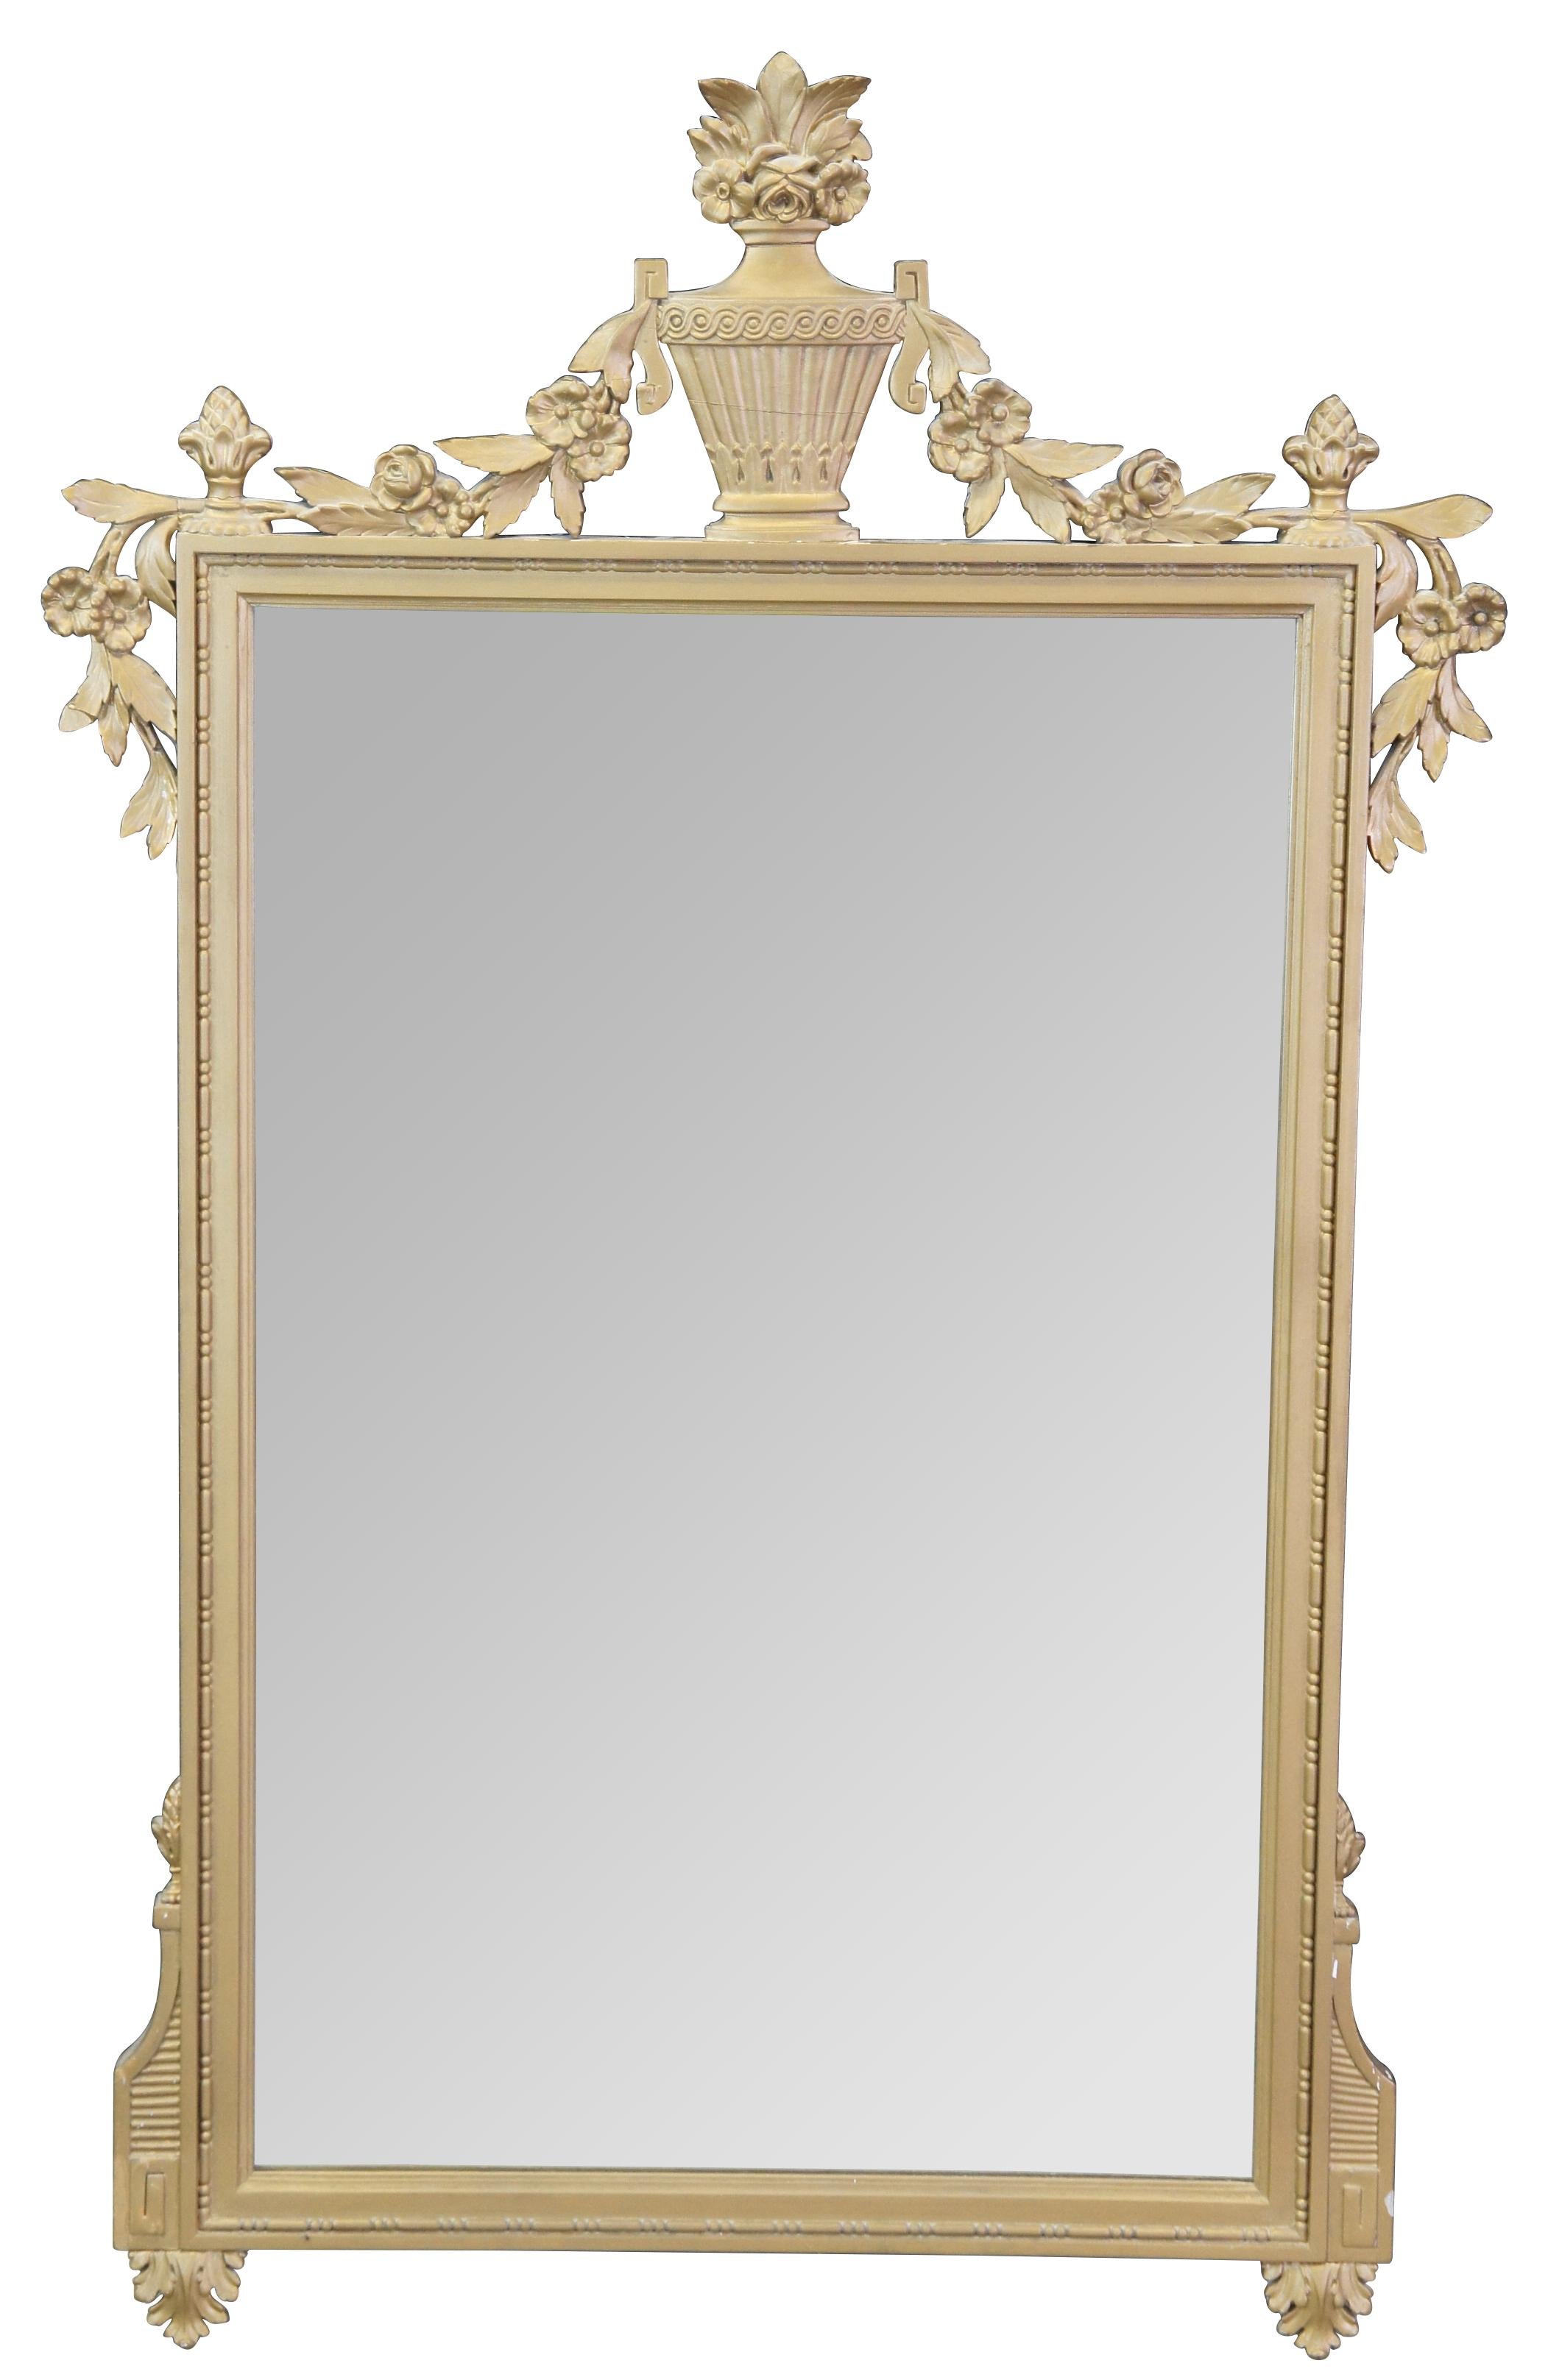 A beautiful mid 20th century Louis XV style wall hanging mirror. Attributed to Robert W. Irwin. Finished in gold with grecian urn finial at the center and floral boquet, flanked by foliate, flowers and acorn finials.